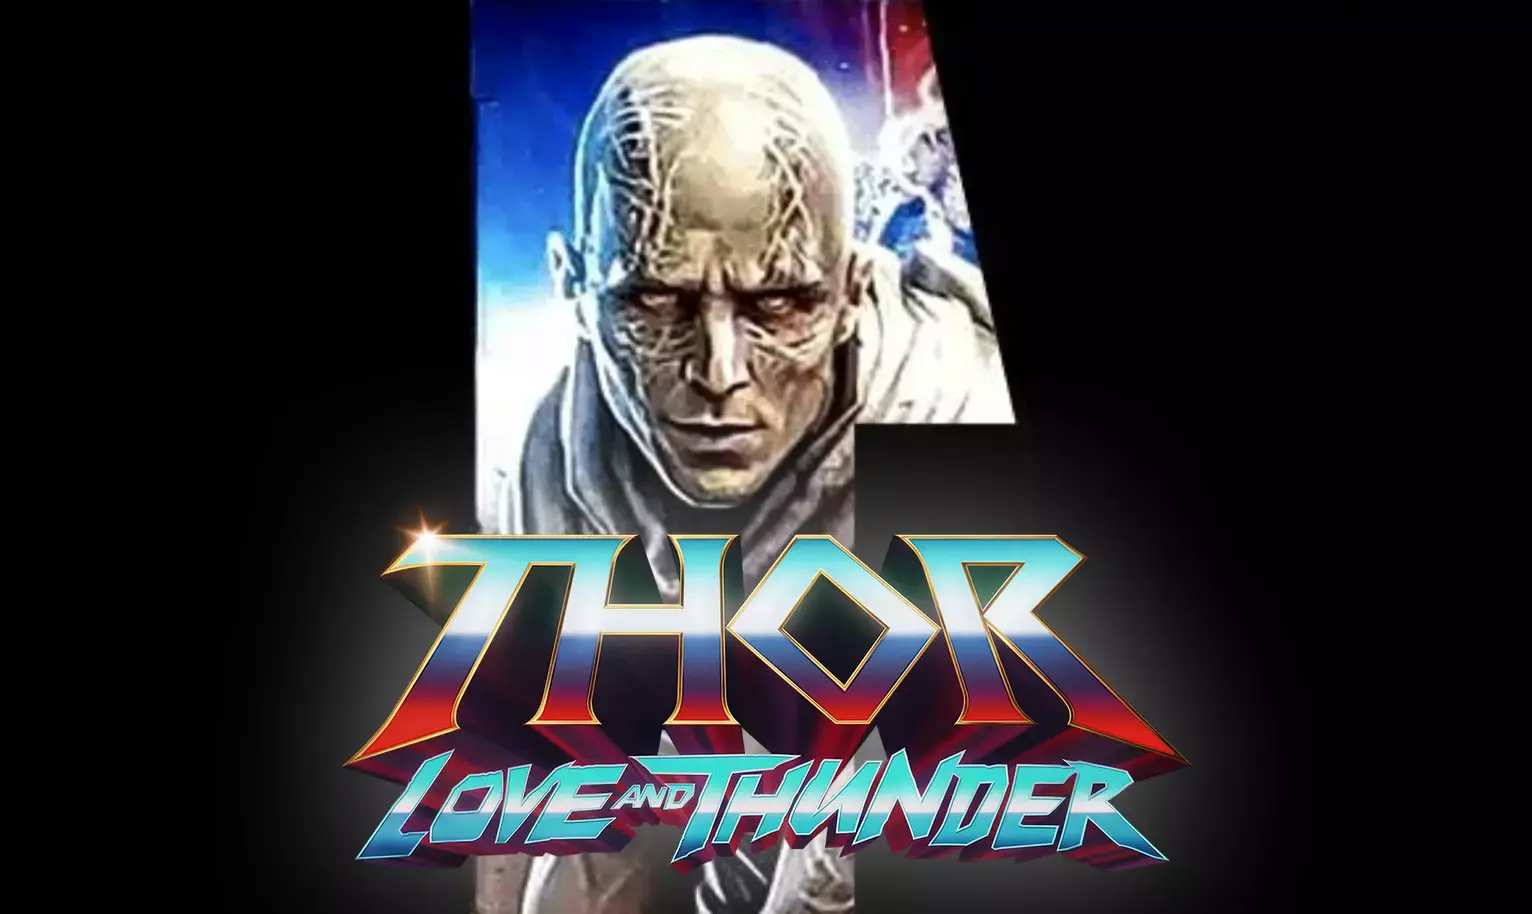 First official look at Christian Bale's Thor: Love and Thunder villain Gorr the God Butcher comes in toy form